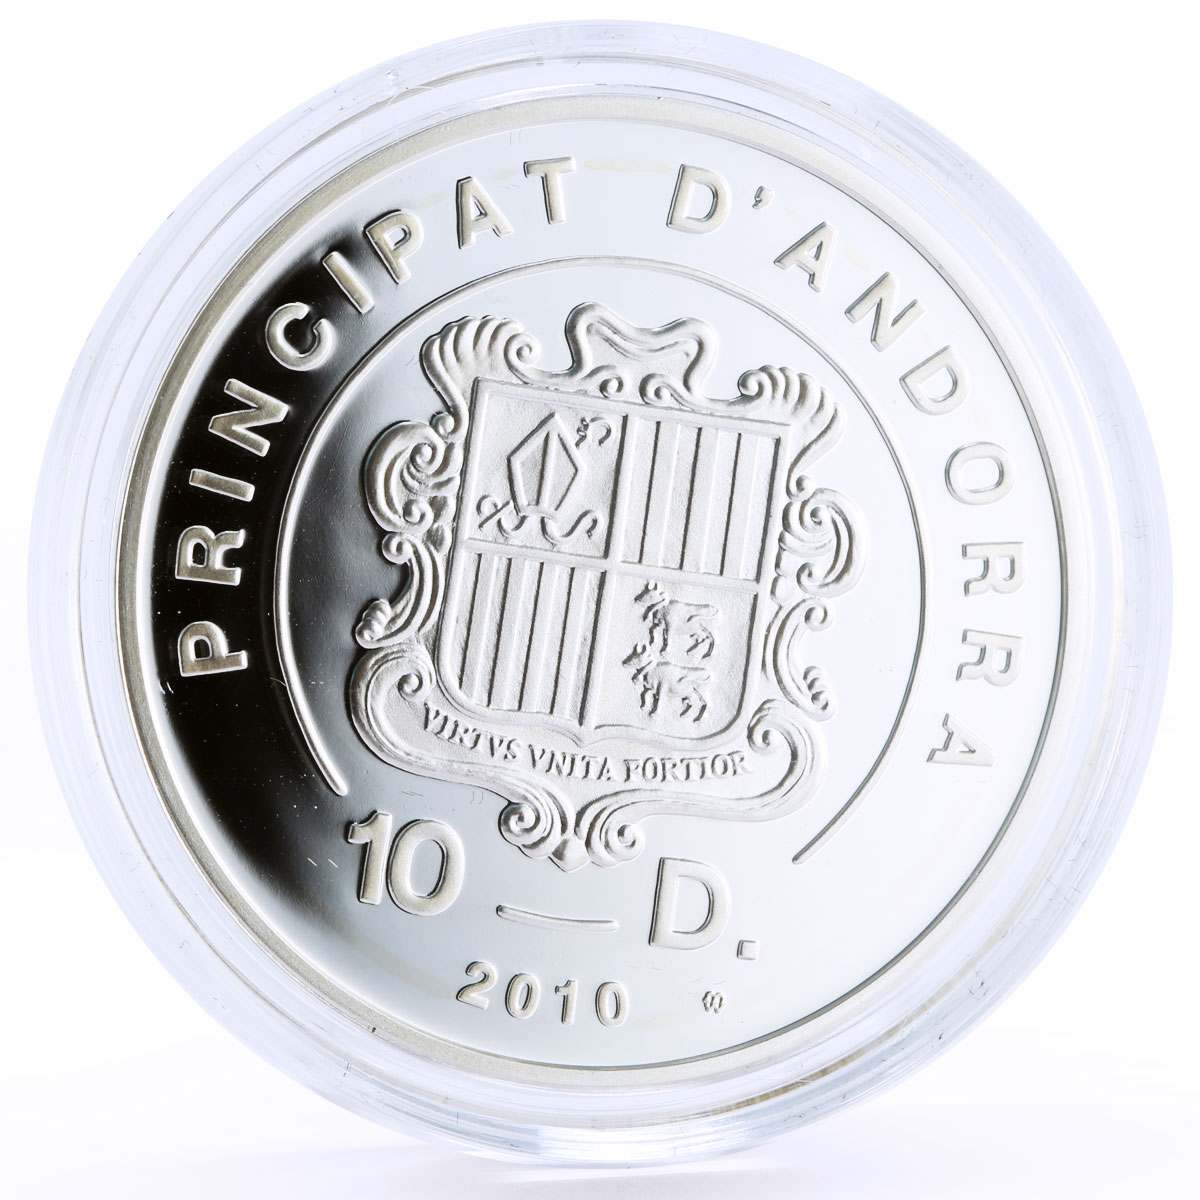 Andorra 10 diners Holy Helpers Saint Barbara proof silver coin 2010